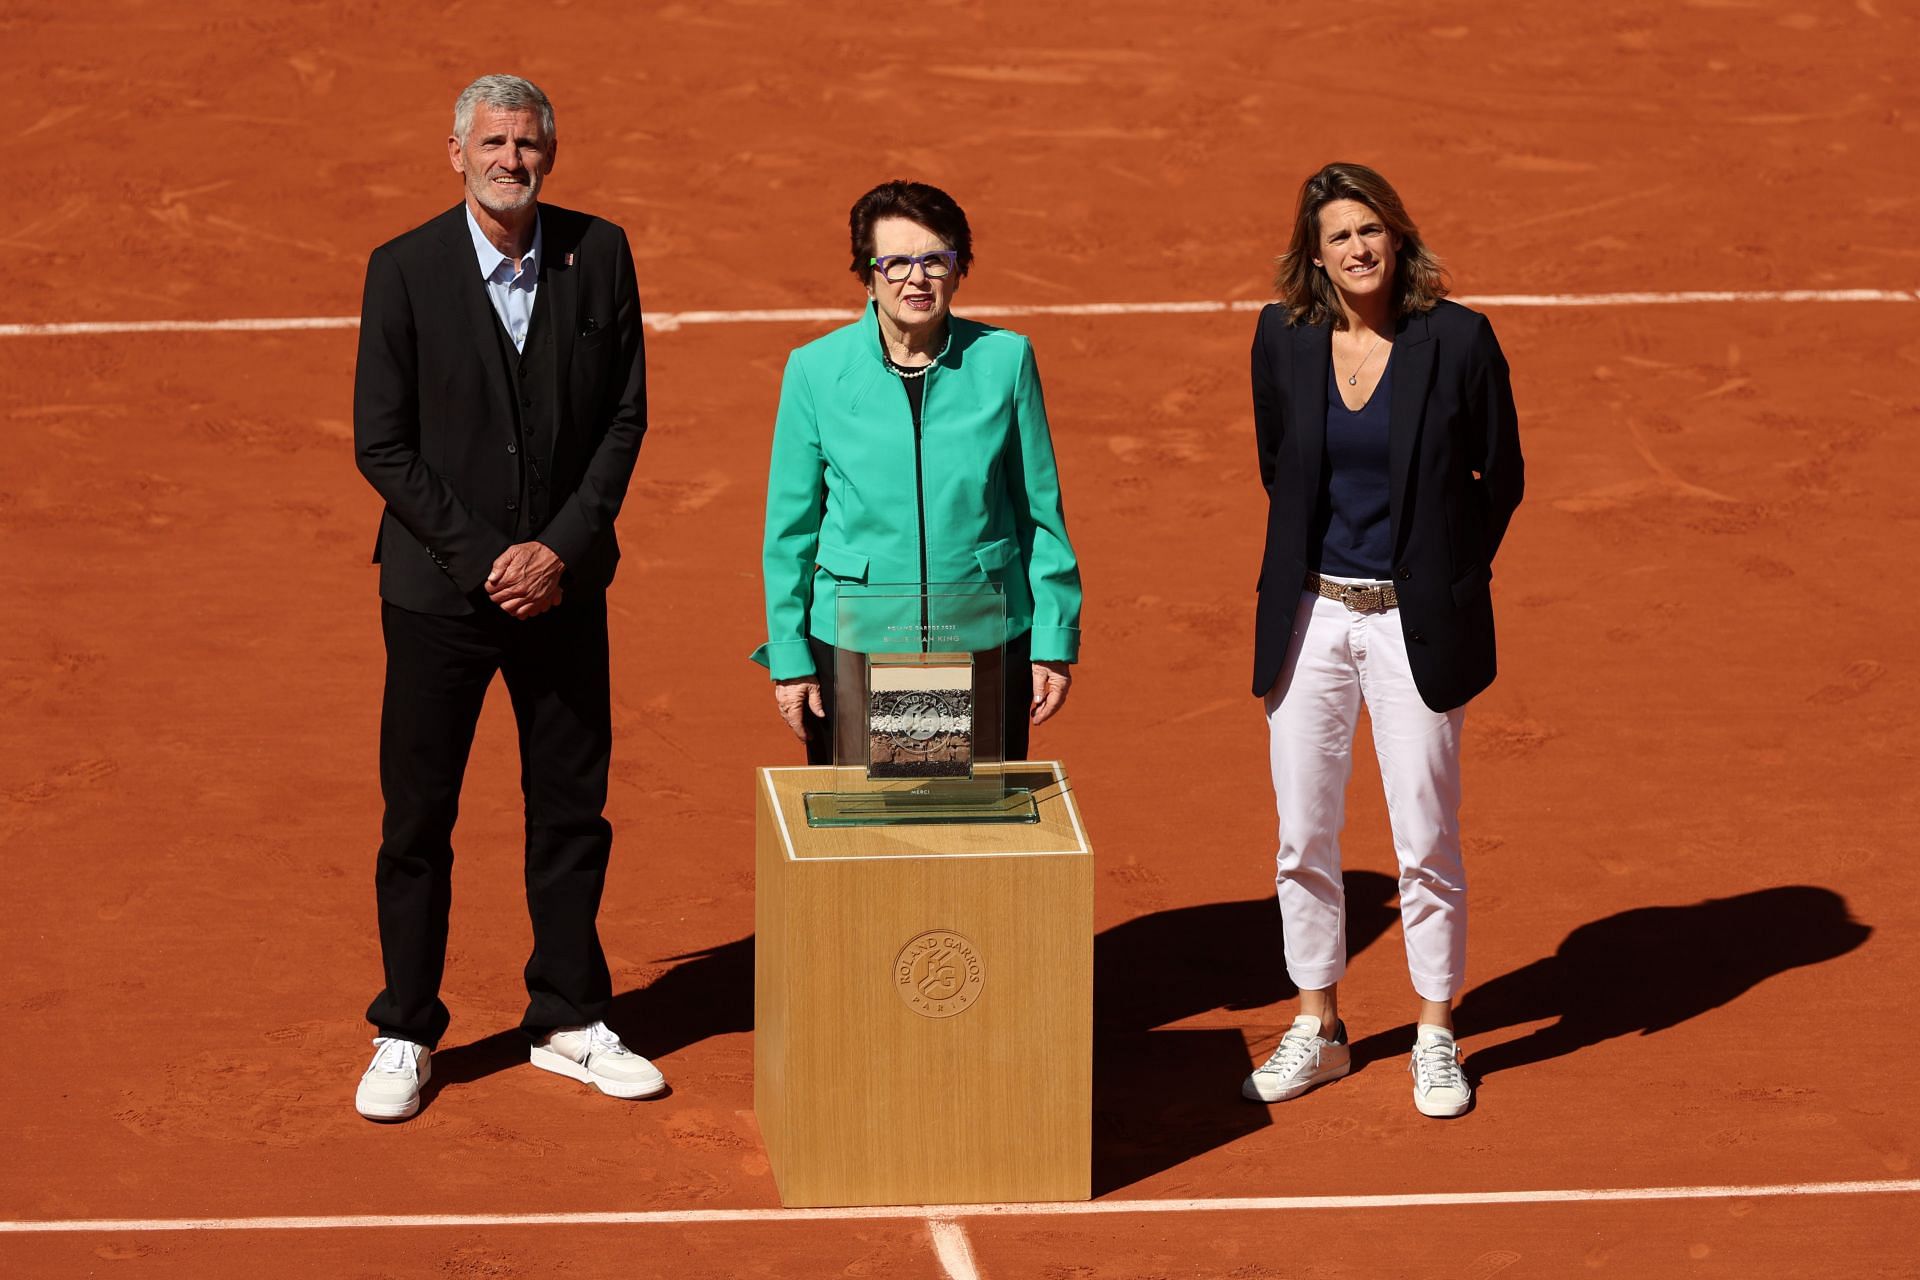 Amelie Mauresmo alongside Billie Jean King and Gilles Moretton at French Open 2022